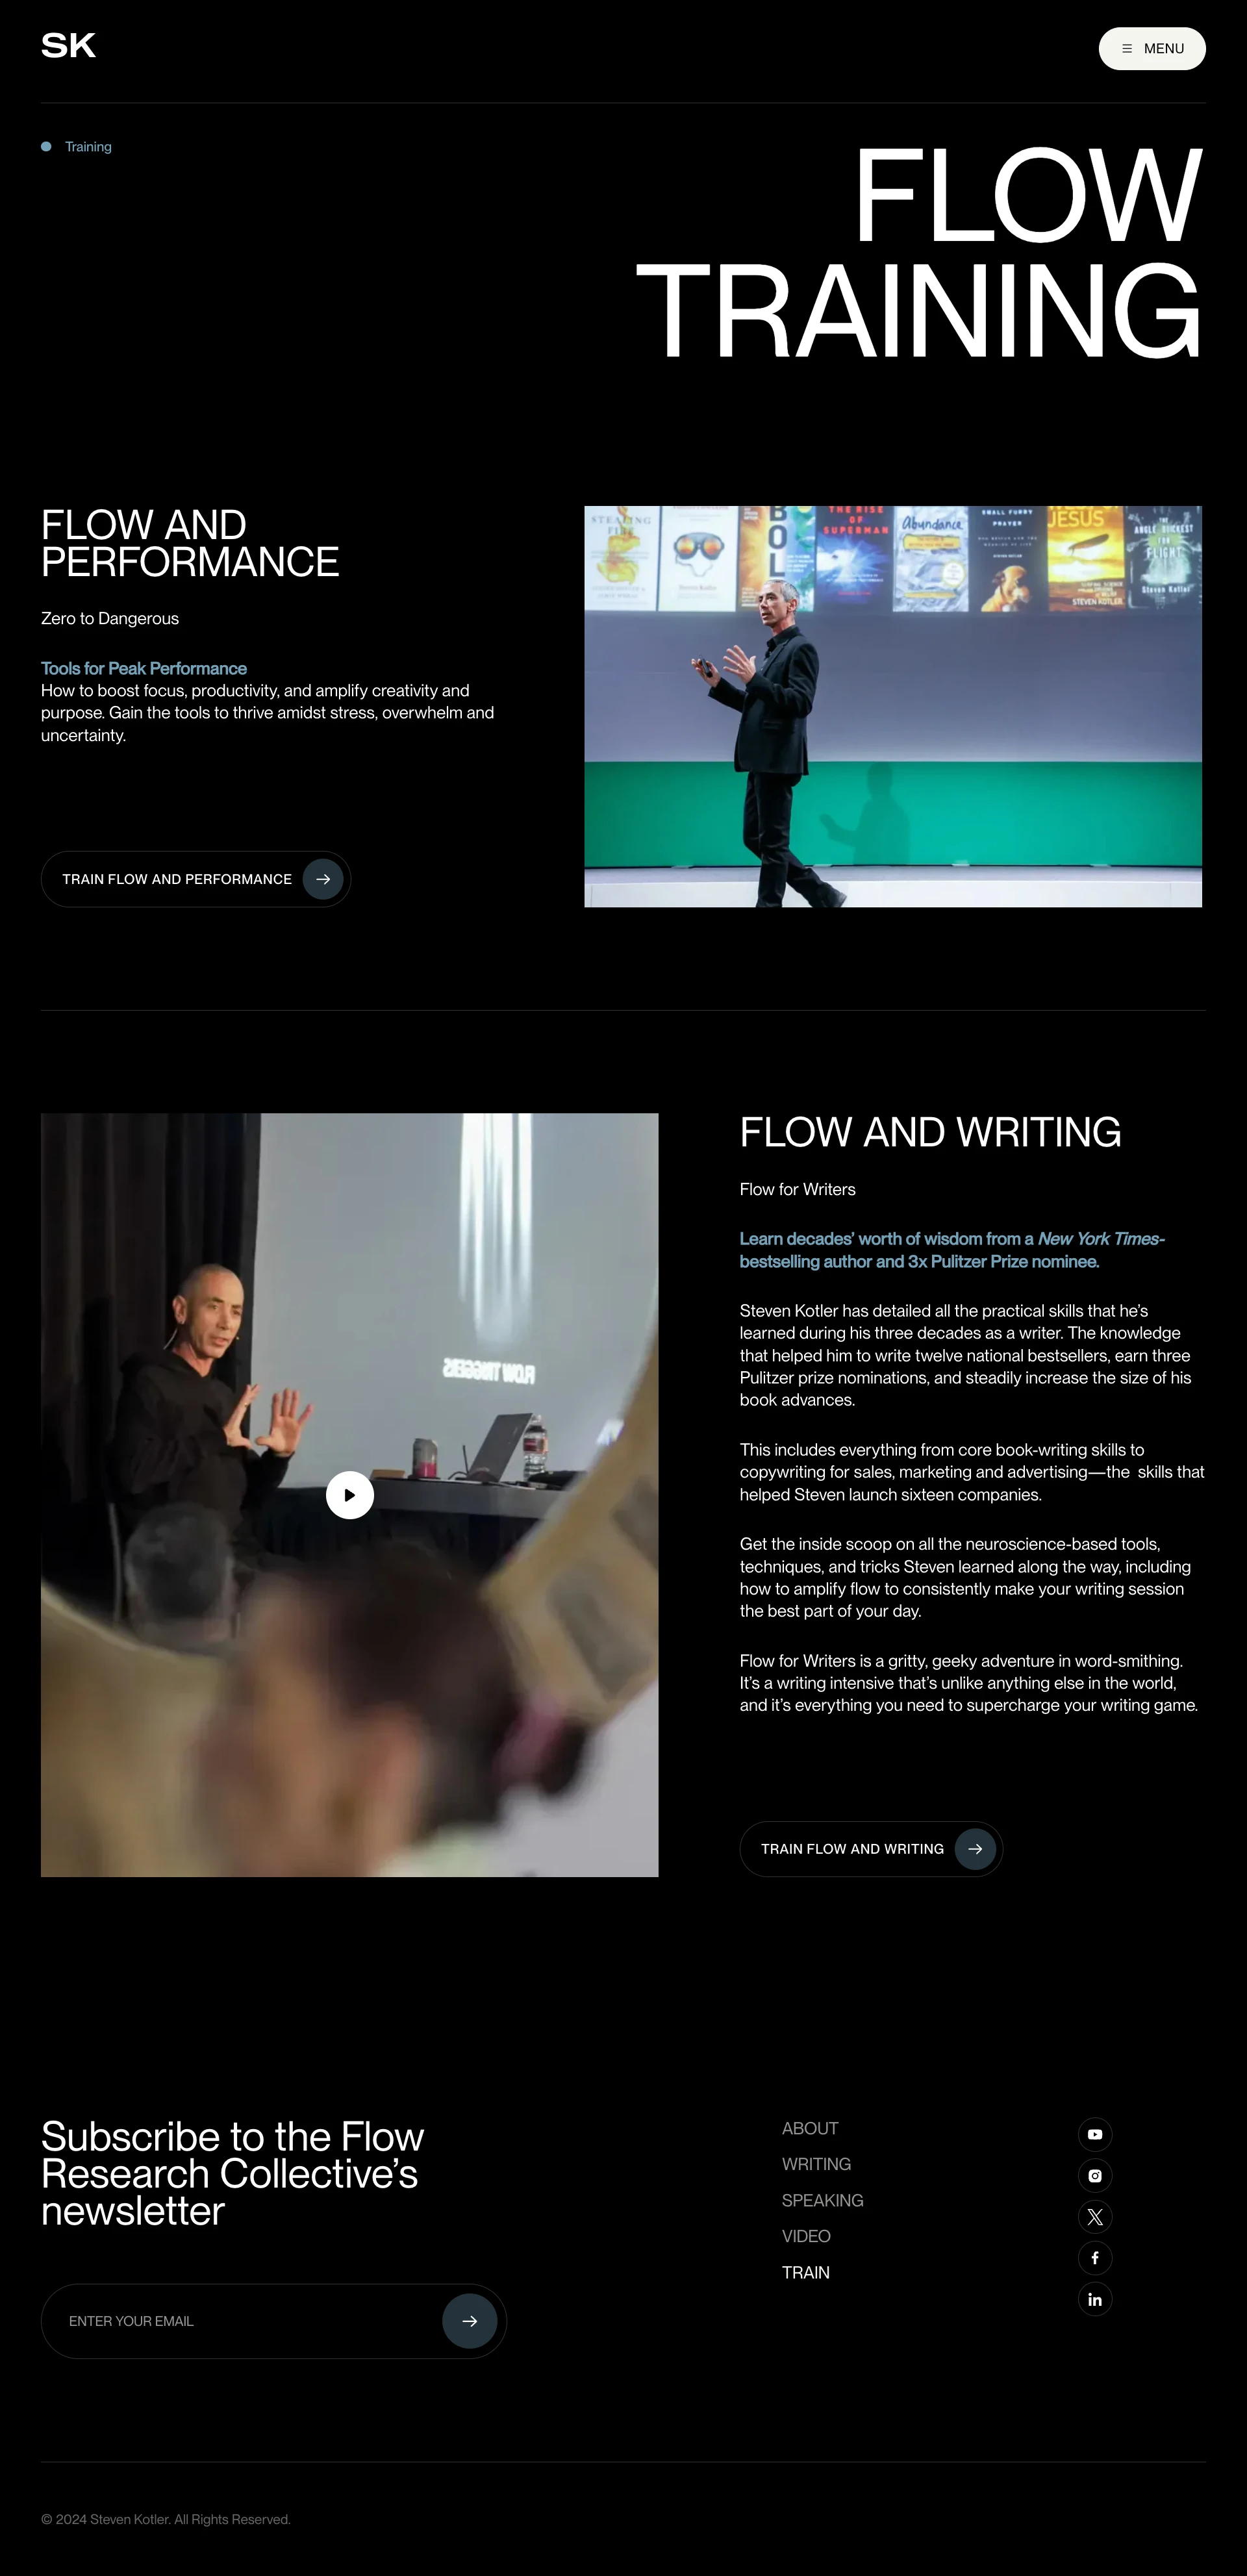 Steven Kotler Landing Page Example: Steven Kotler is a New York Times-bestselling author, an award-winning journalist, and the cofounder and executive director of the Flow Research Collective. He is one of the world’s leading experts on human performance.